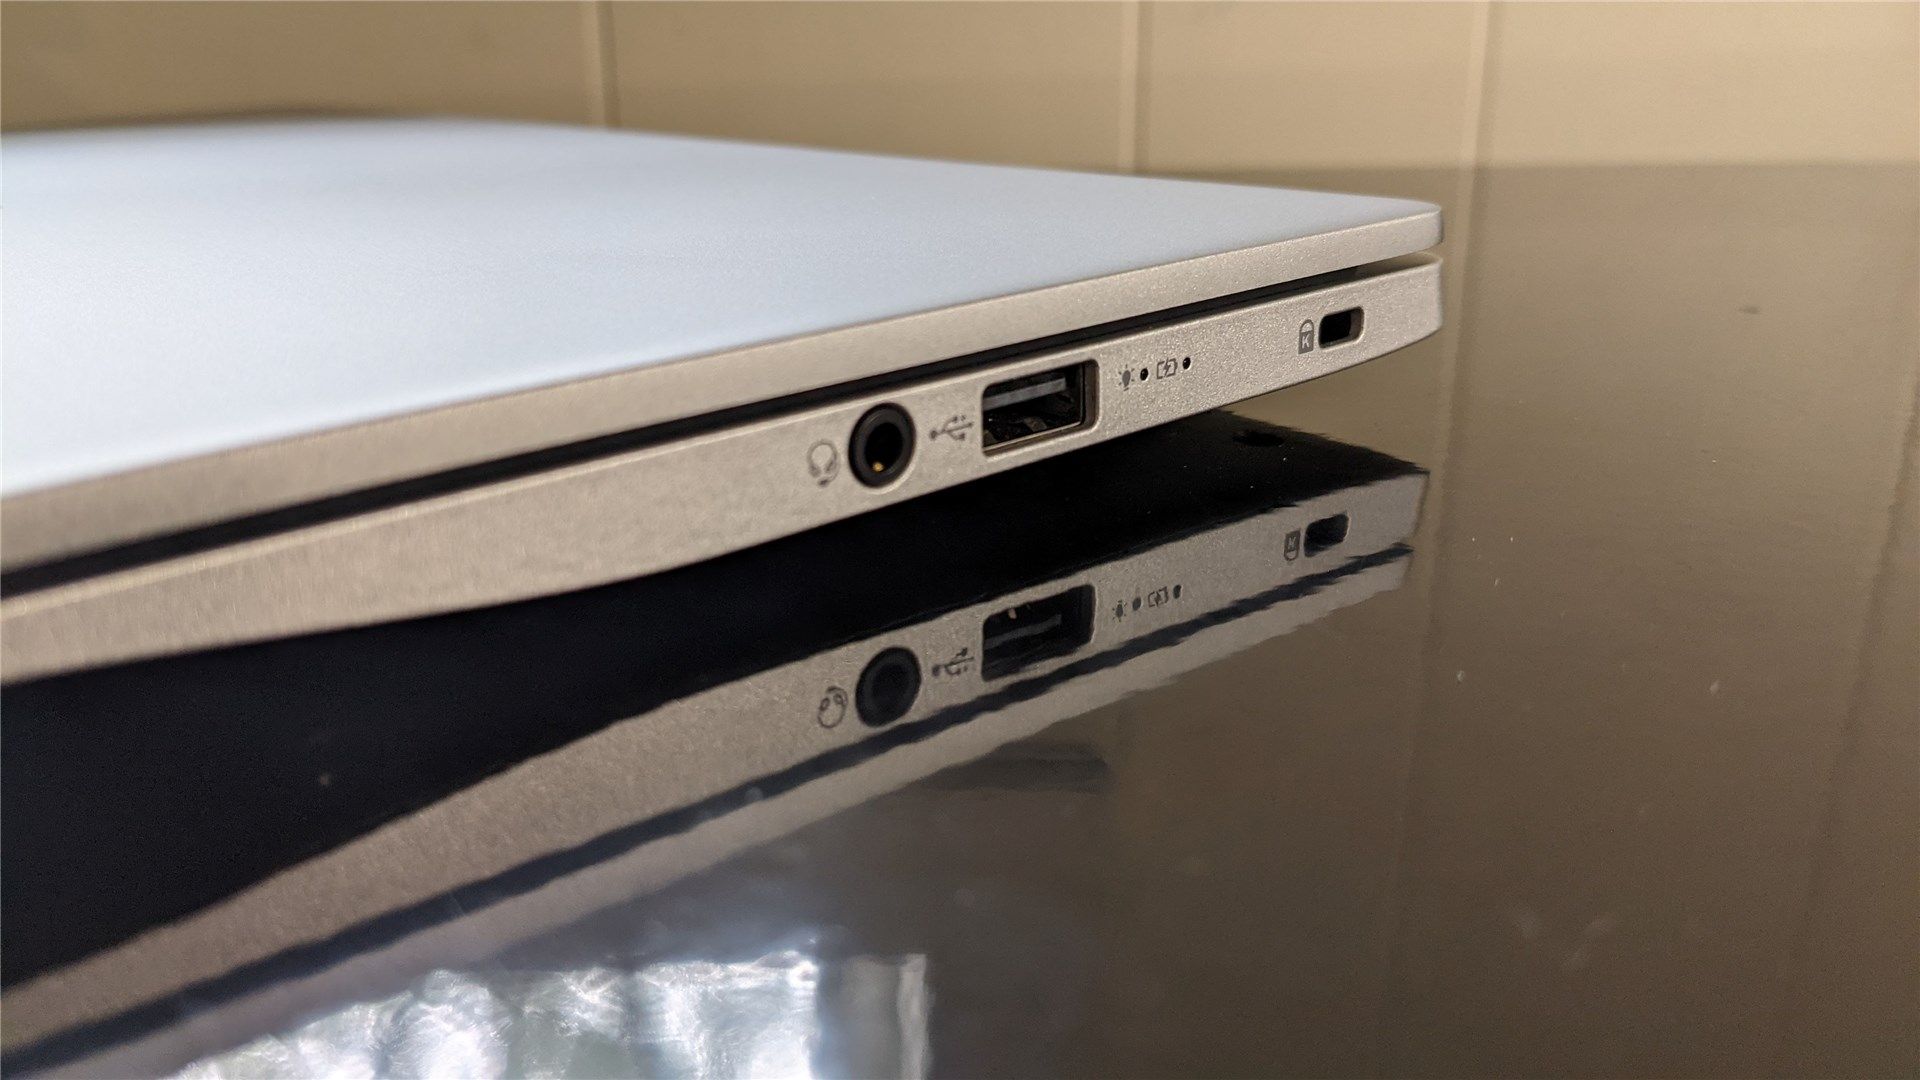 The ports on the right side of the Swift 3: headphone jack, usb-a 2.0, and Kensington lock